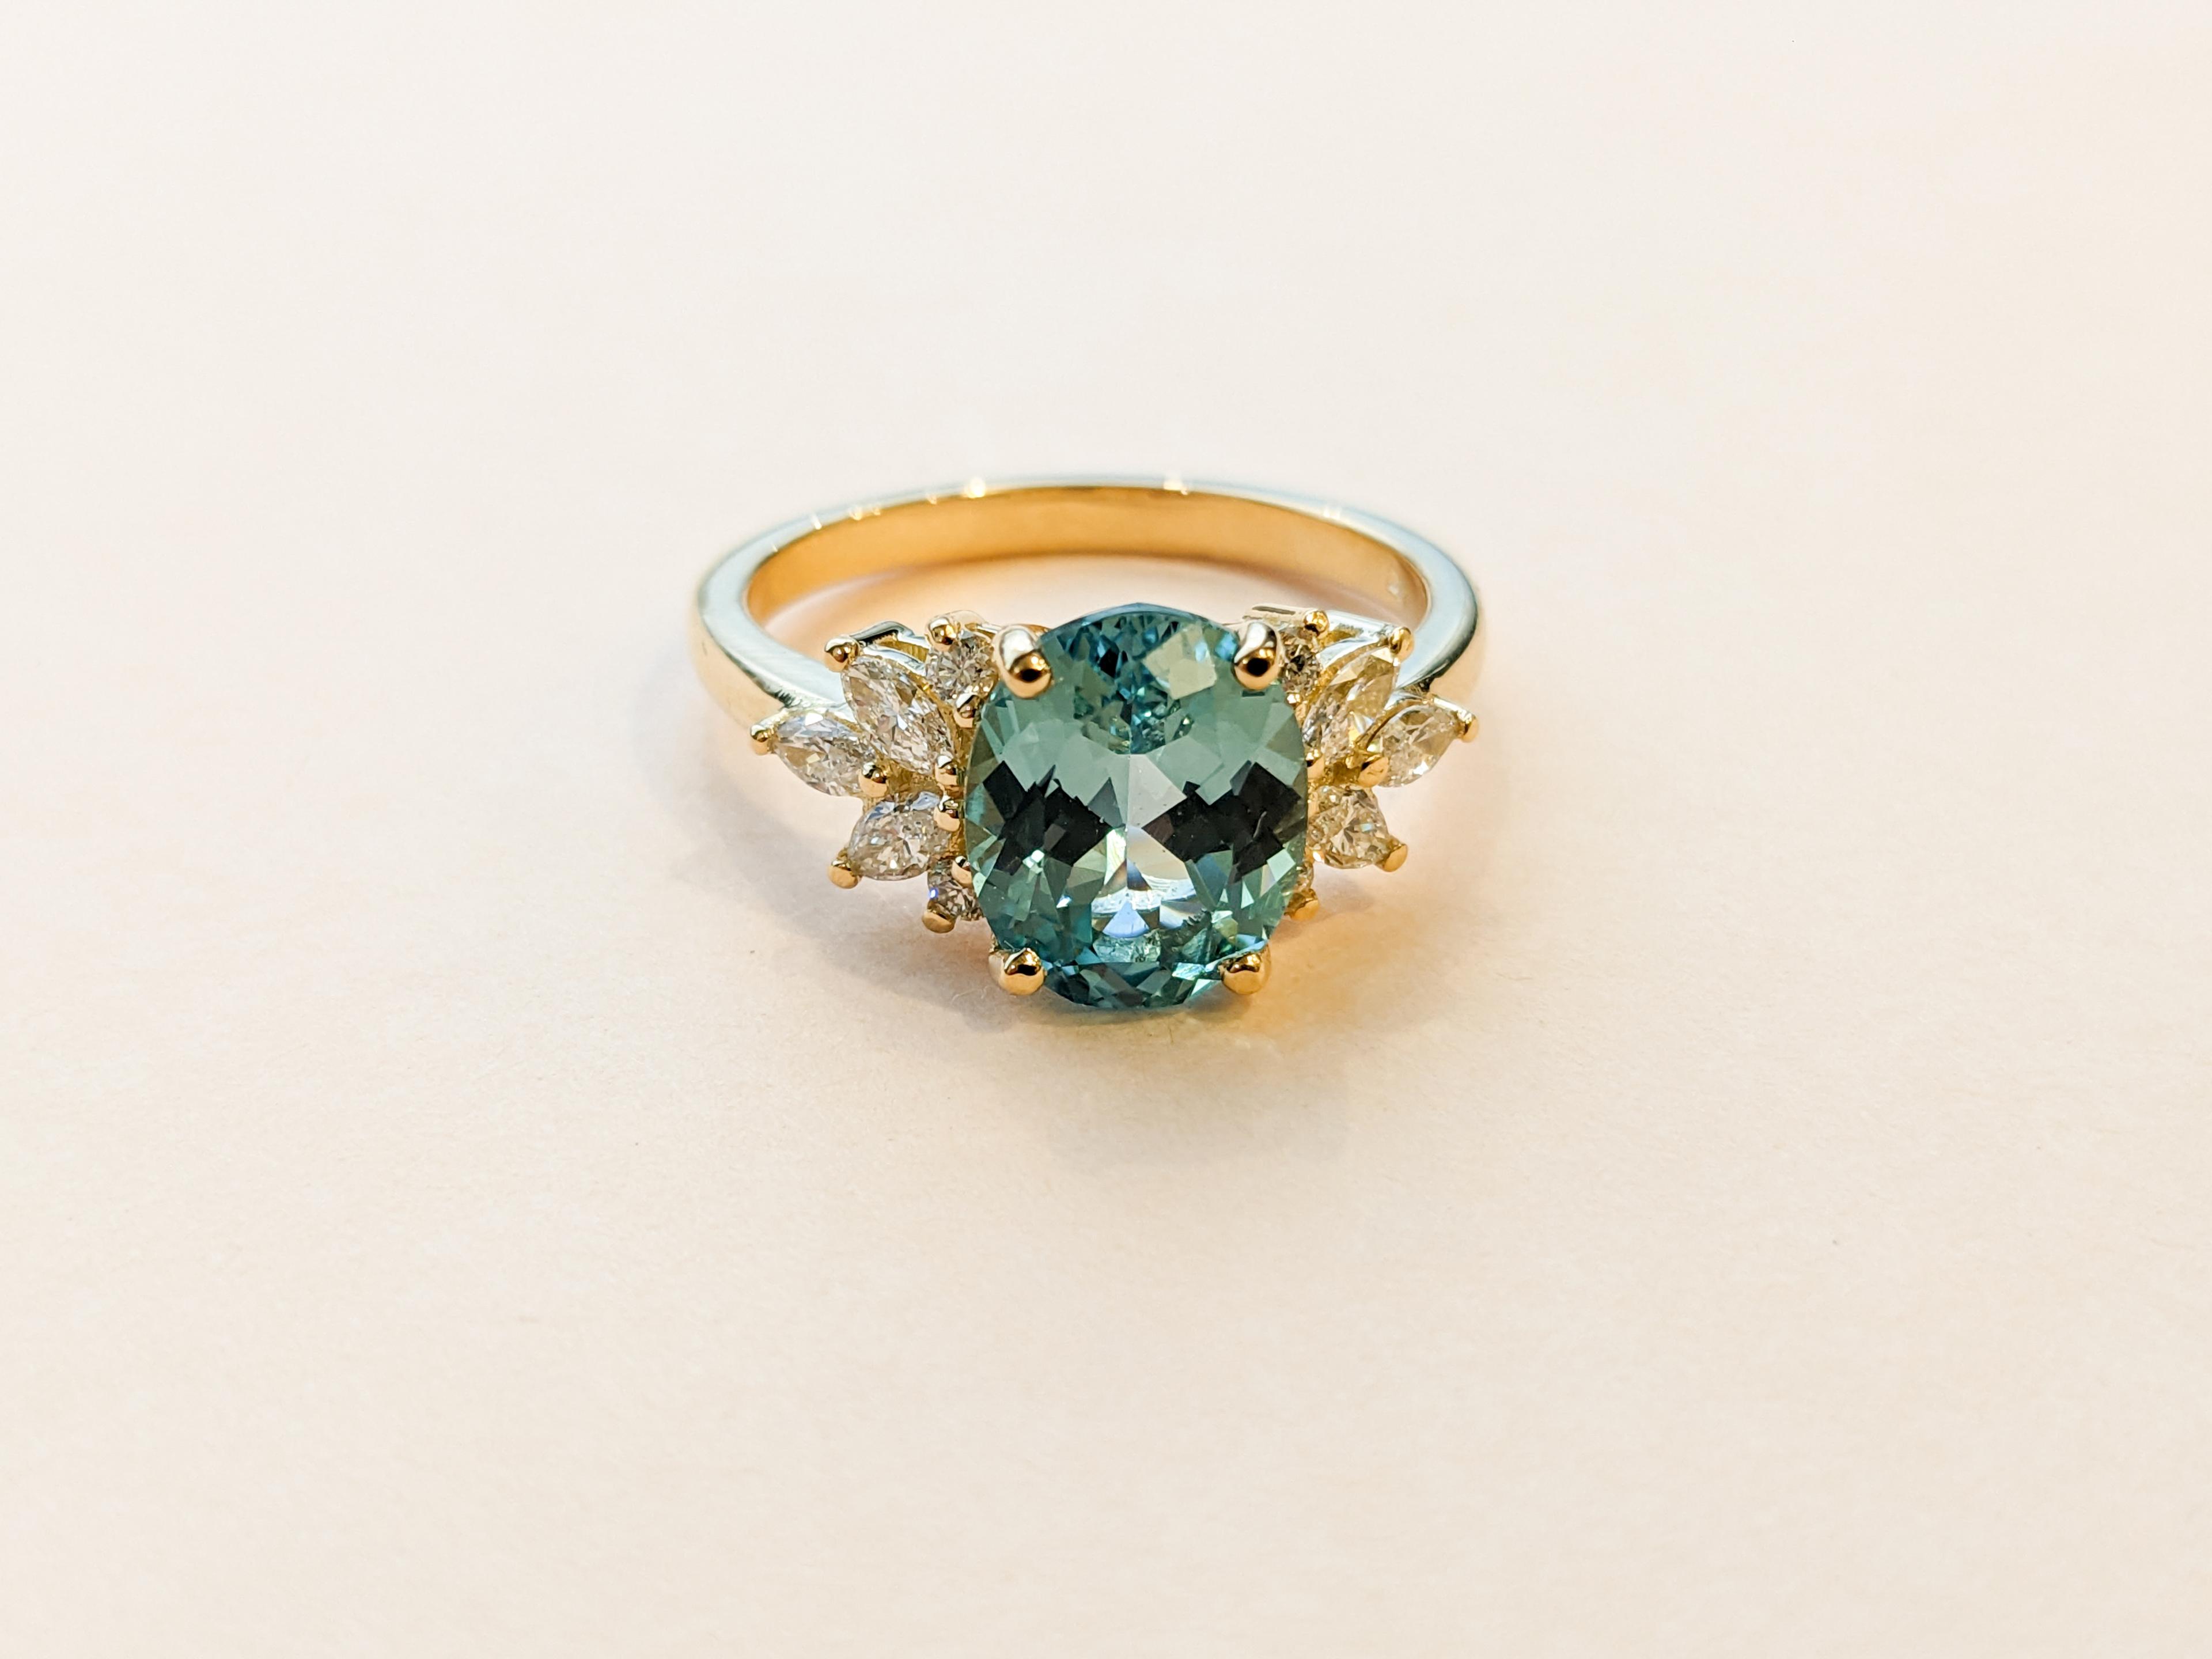 Teal oval sapphire in 10 accenting pear and round diamonds in a yellow gold band